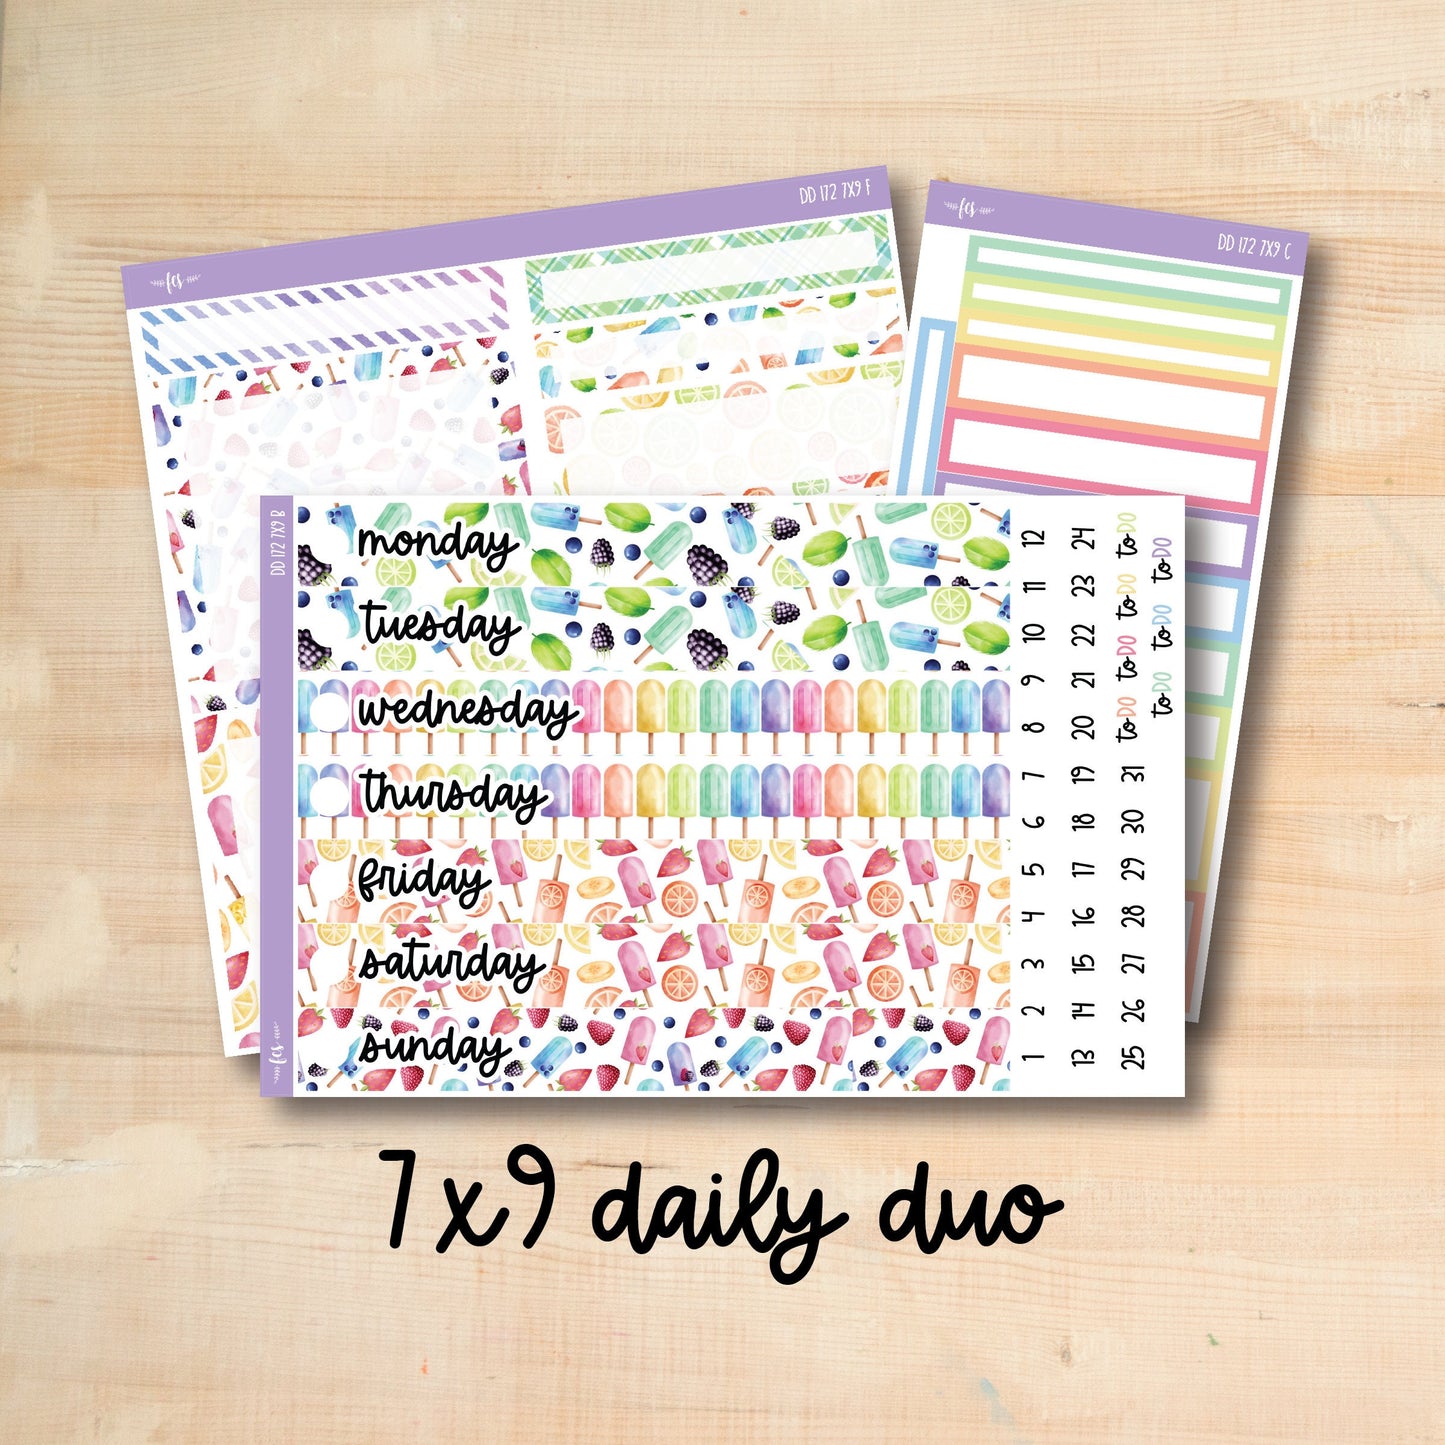 7x9 Daily Duo 172 || RAINBOW POPSICLES 7x9 Daily Duo Kit